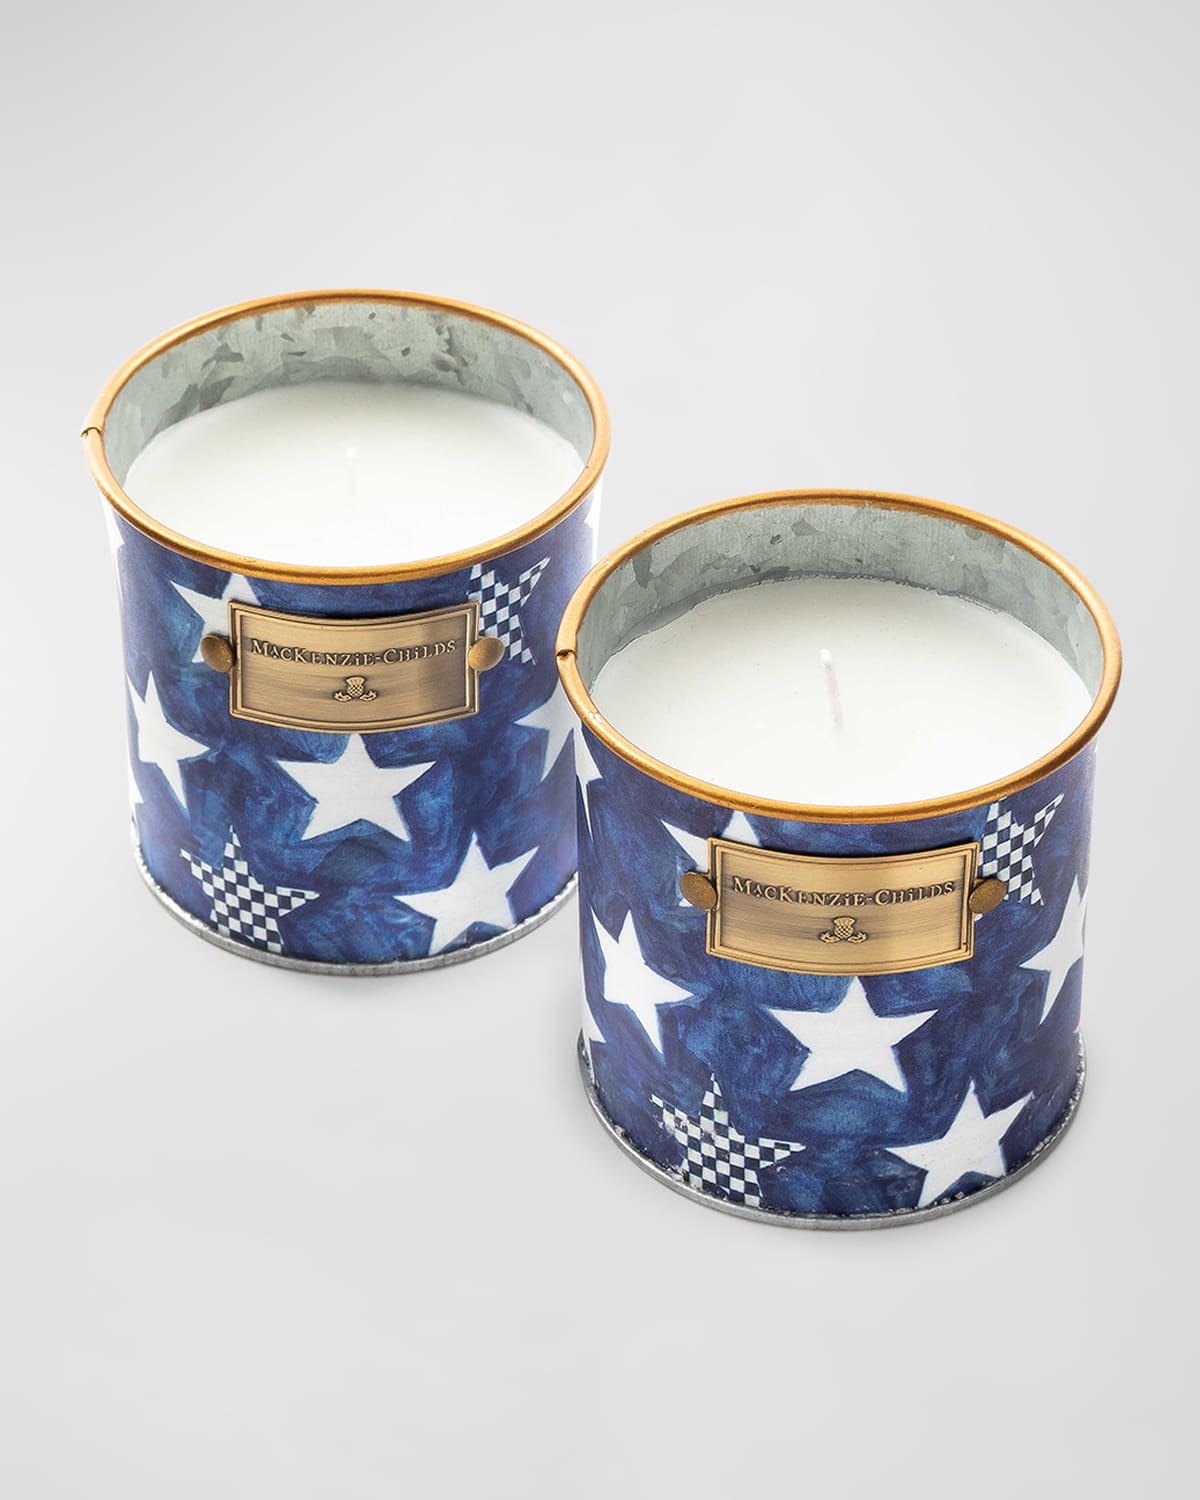 Mackenzie-childs Small Royal Star Citronella Candles, Set Of 2